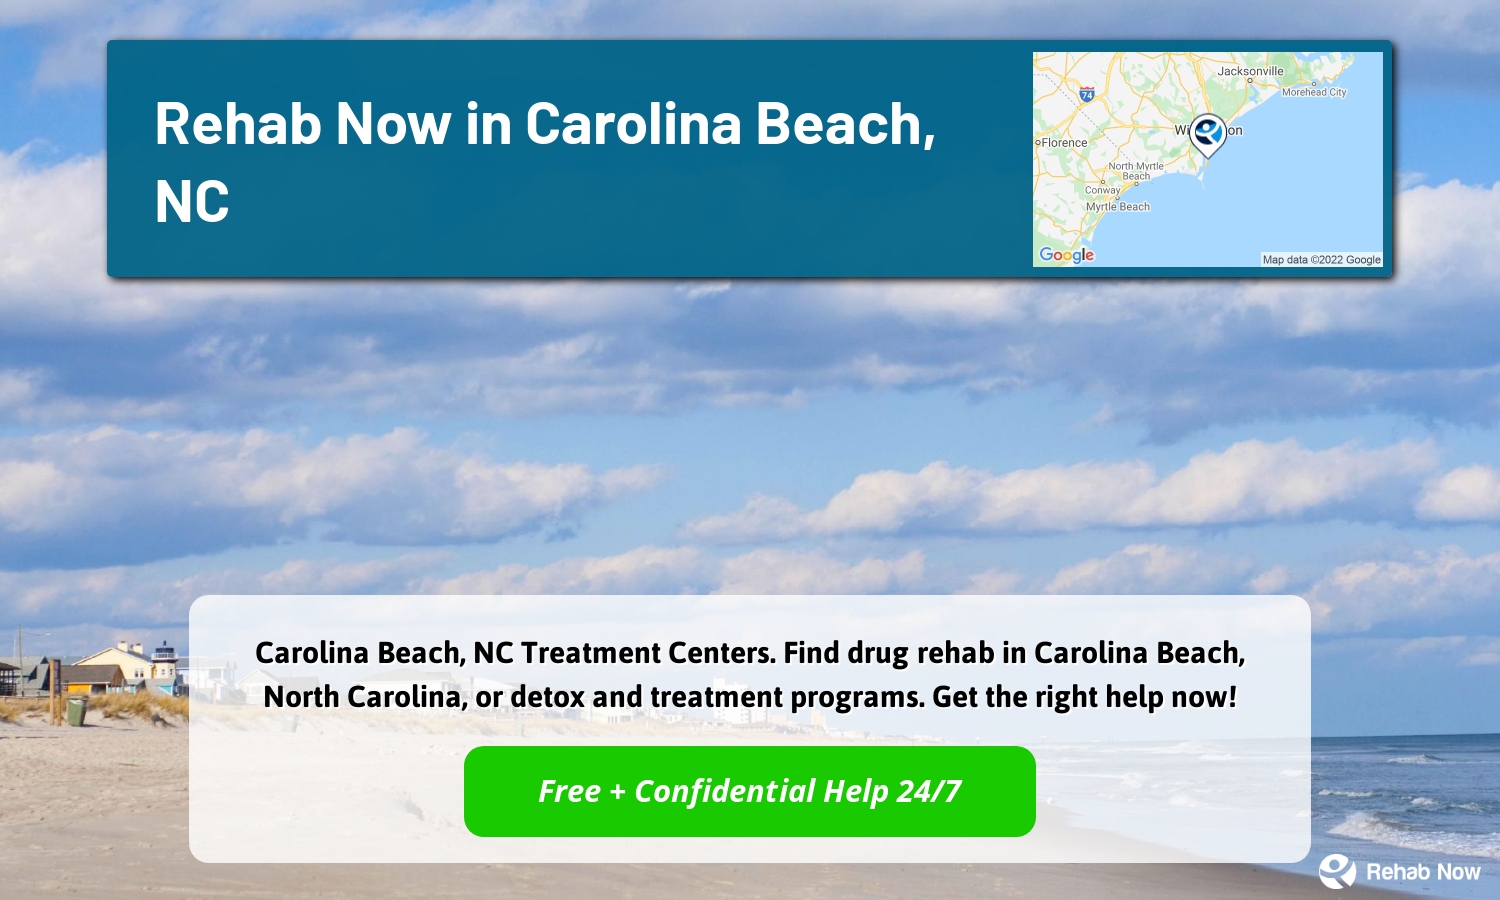 Carolina Beach, NC Treatment Centers. Find drug rehab in Carolina Beach, North Carolina, or detox and treatment programs. Get the right help now!